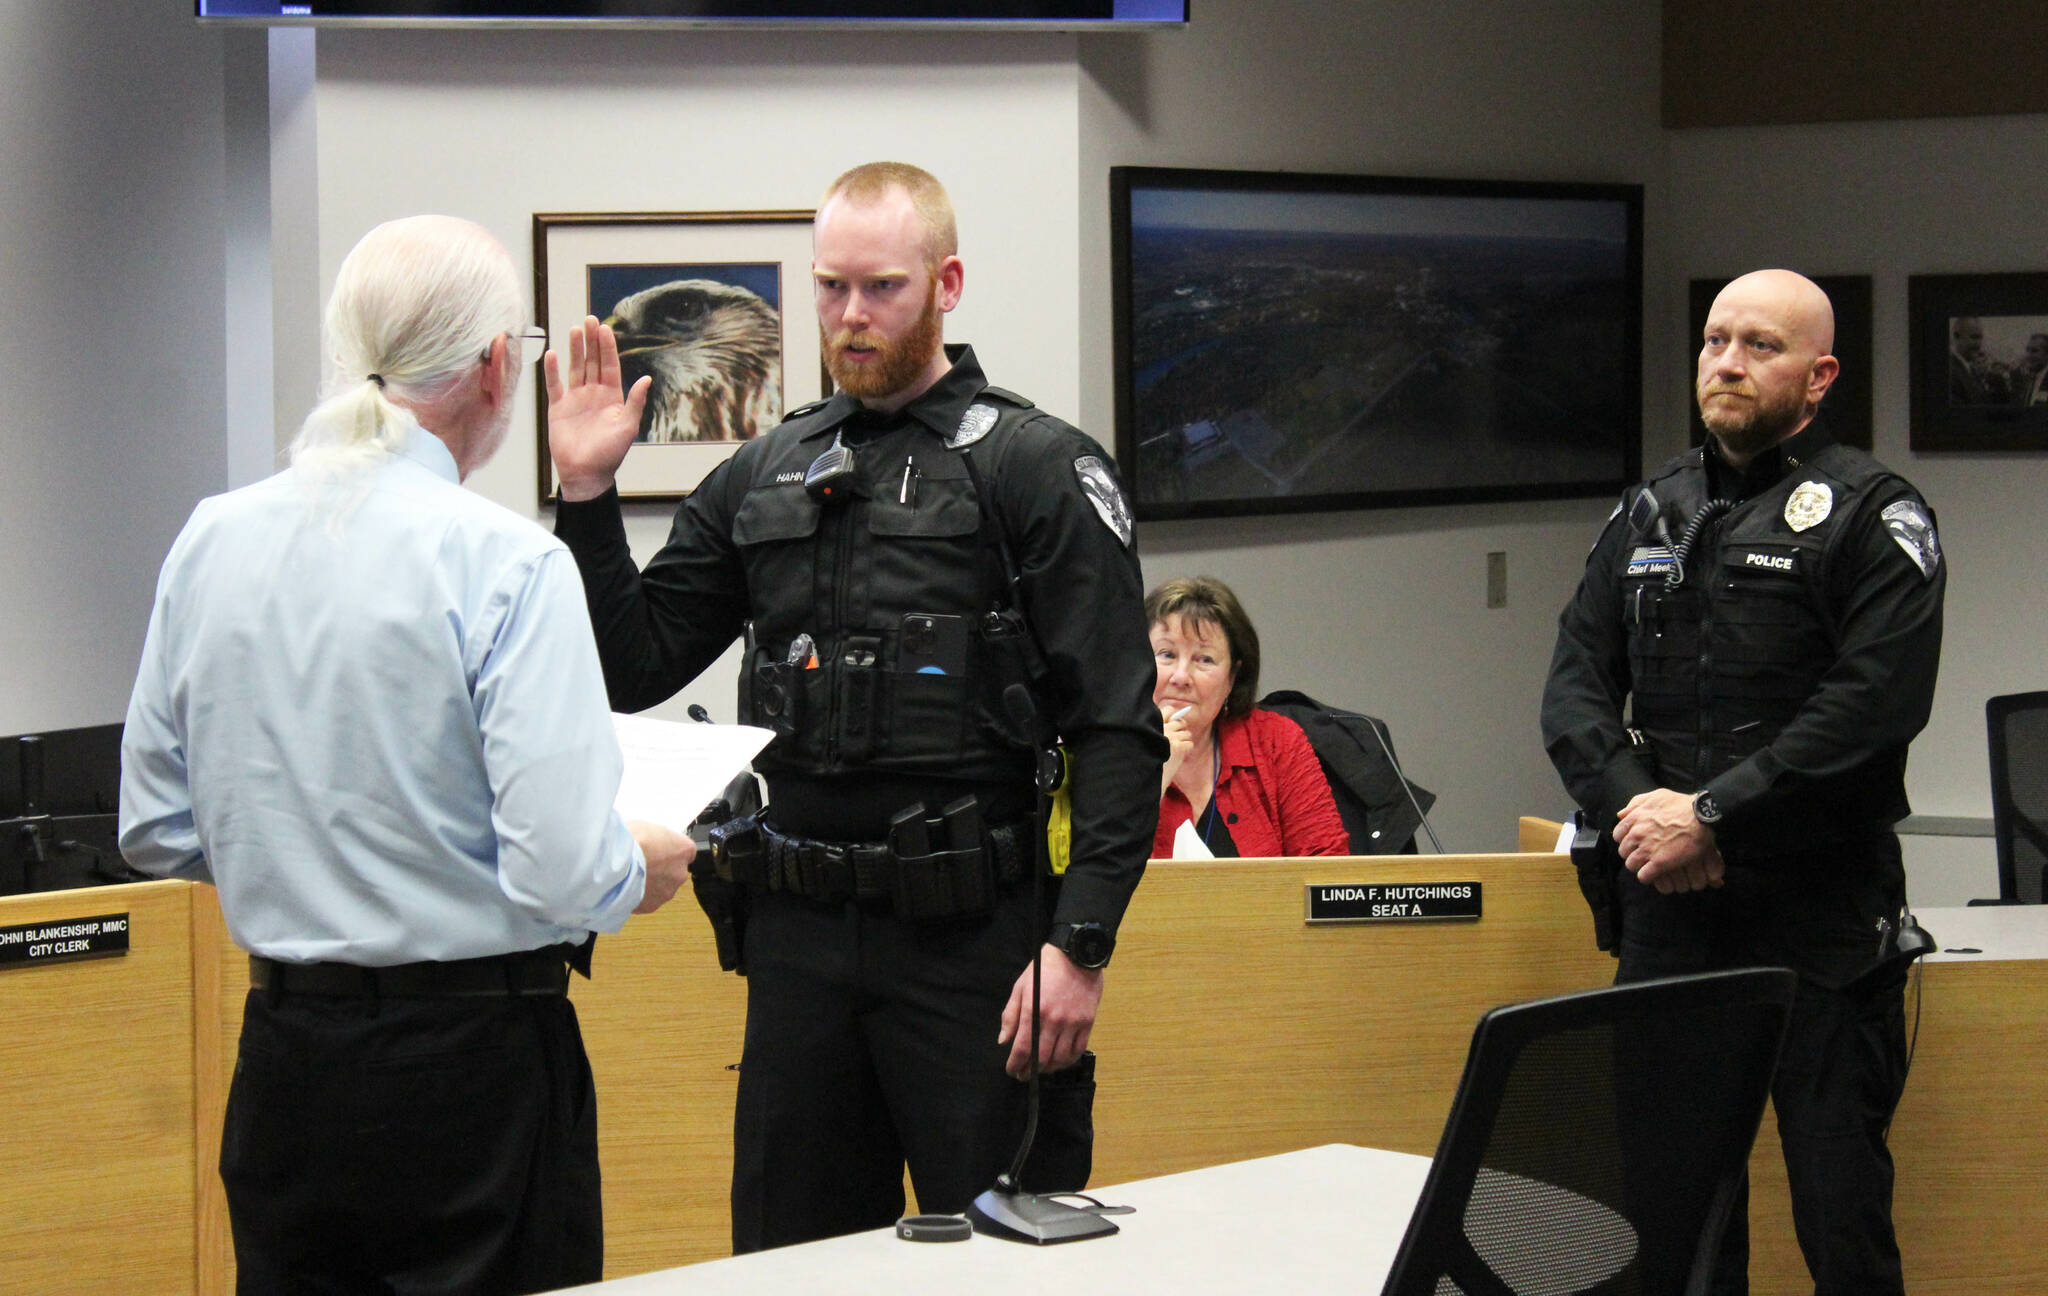 From left, Soldotna Mayor Paul Whitney swears in Soldotna Police Officer Bryan Hahn while Soldotna Police Chief Gene Meek looks on during a Soldotna City Council meeting on Wednesday, June 28, 2023 in Soldotna, Alaska. (Ashlyn O’Hara/Peninsula Clarion)